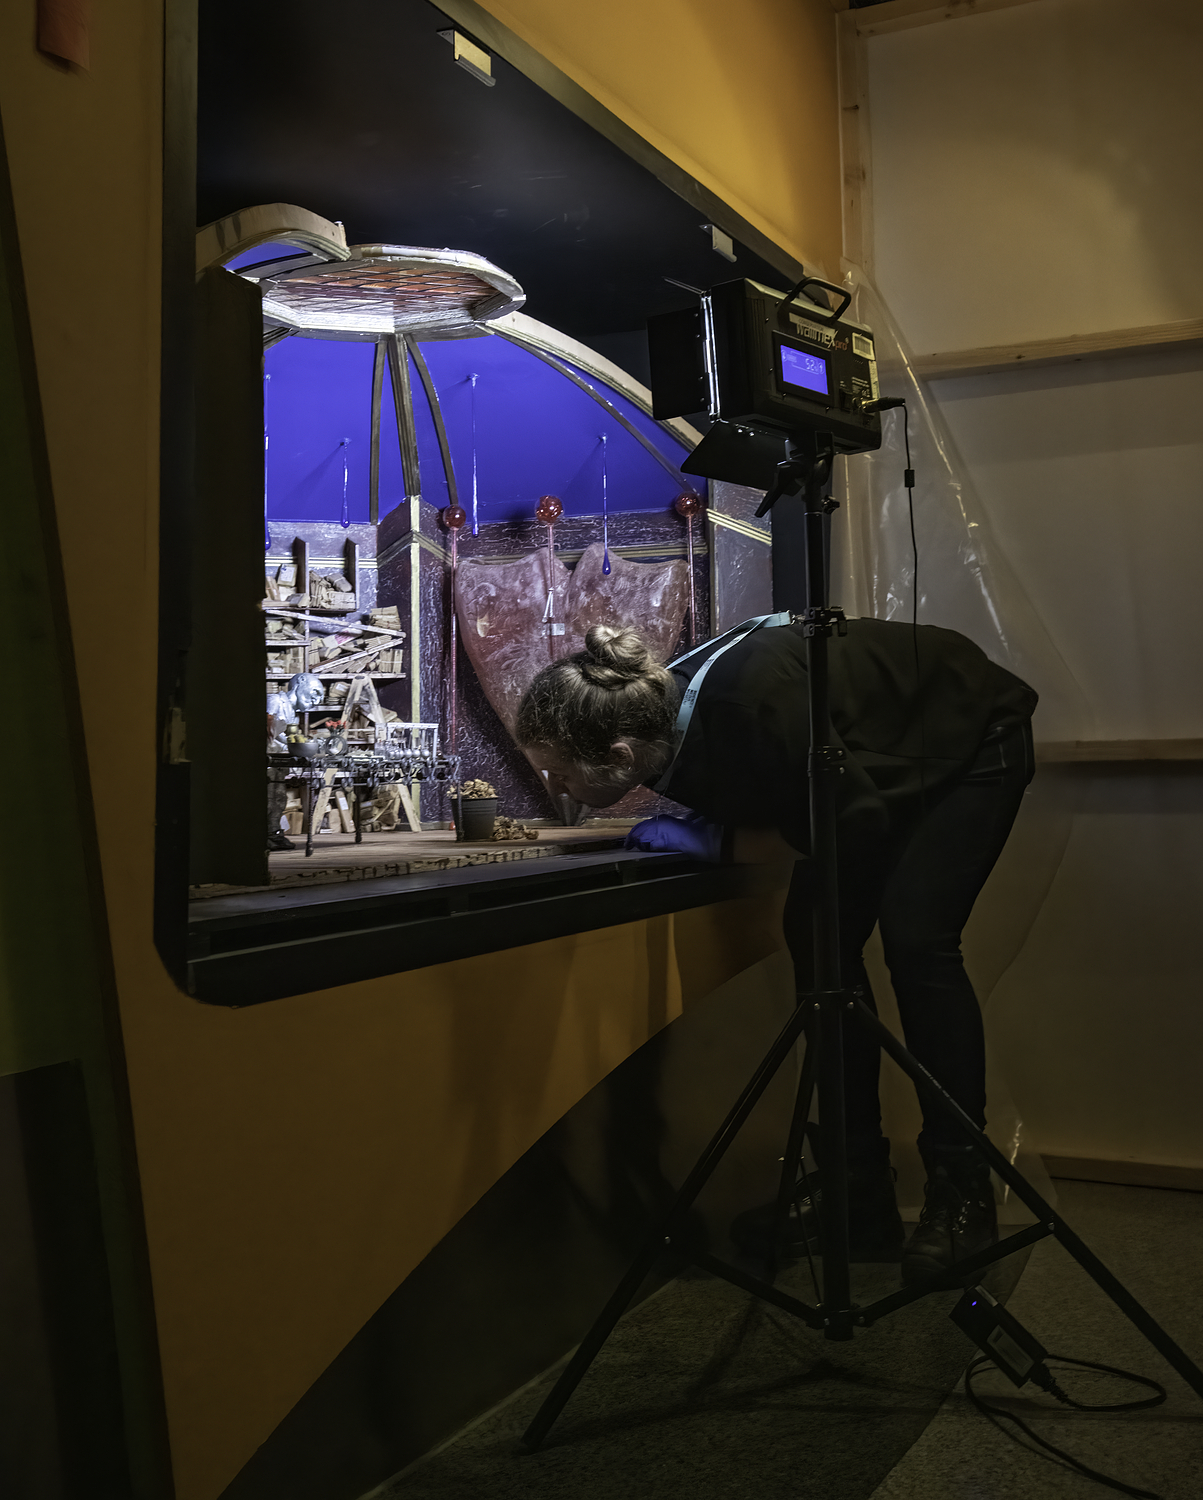 A collections team member leans over to look closely at an animation set, lit by a task lamp